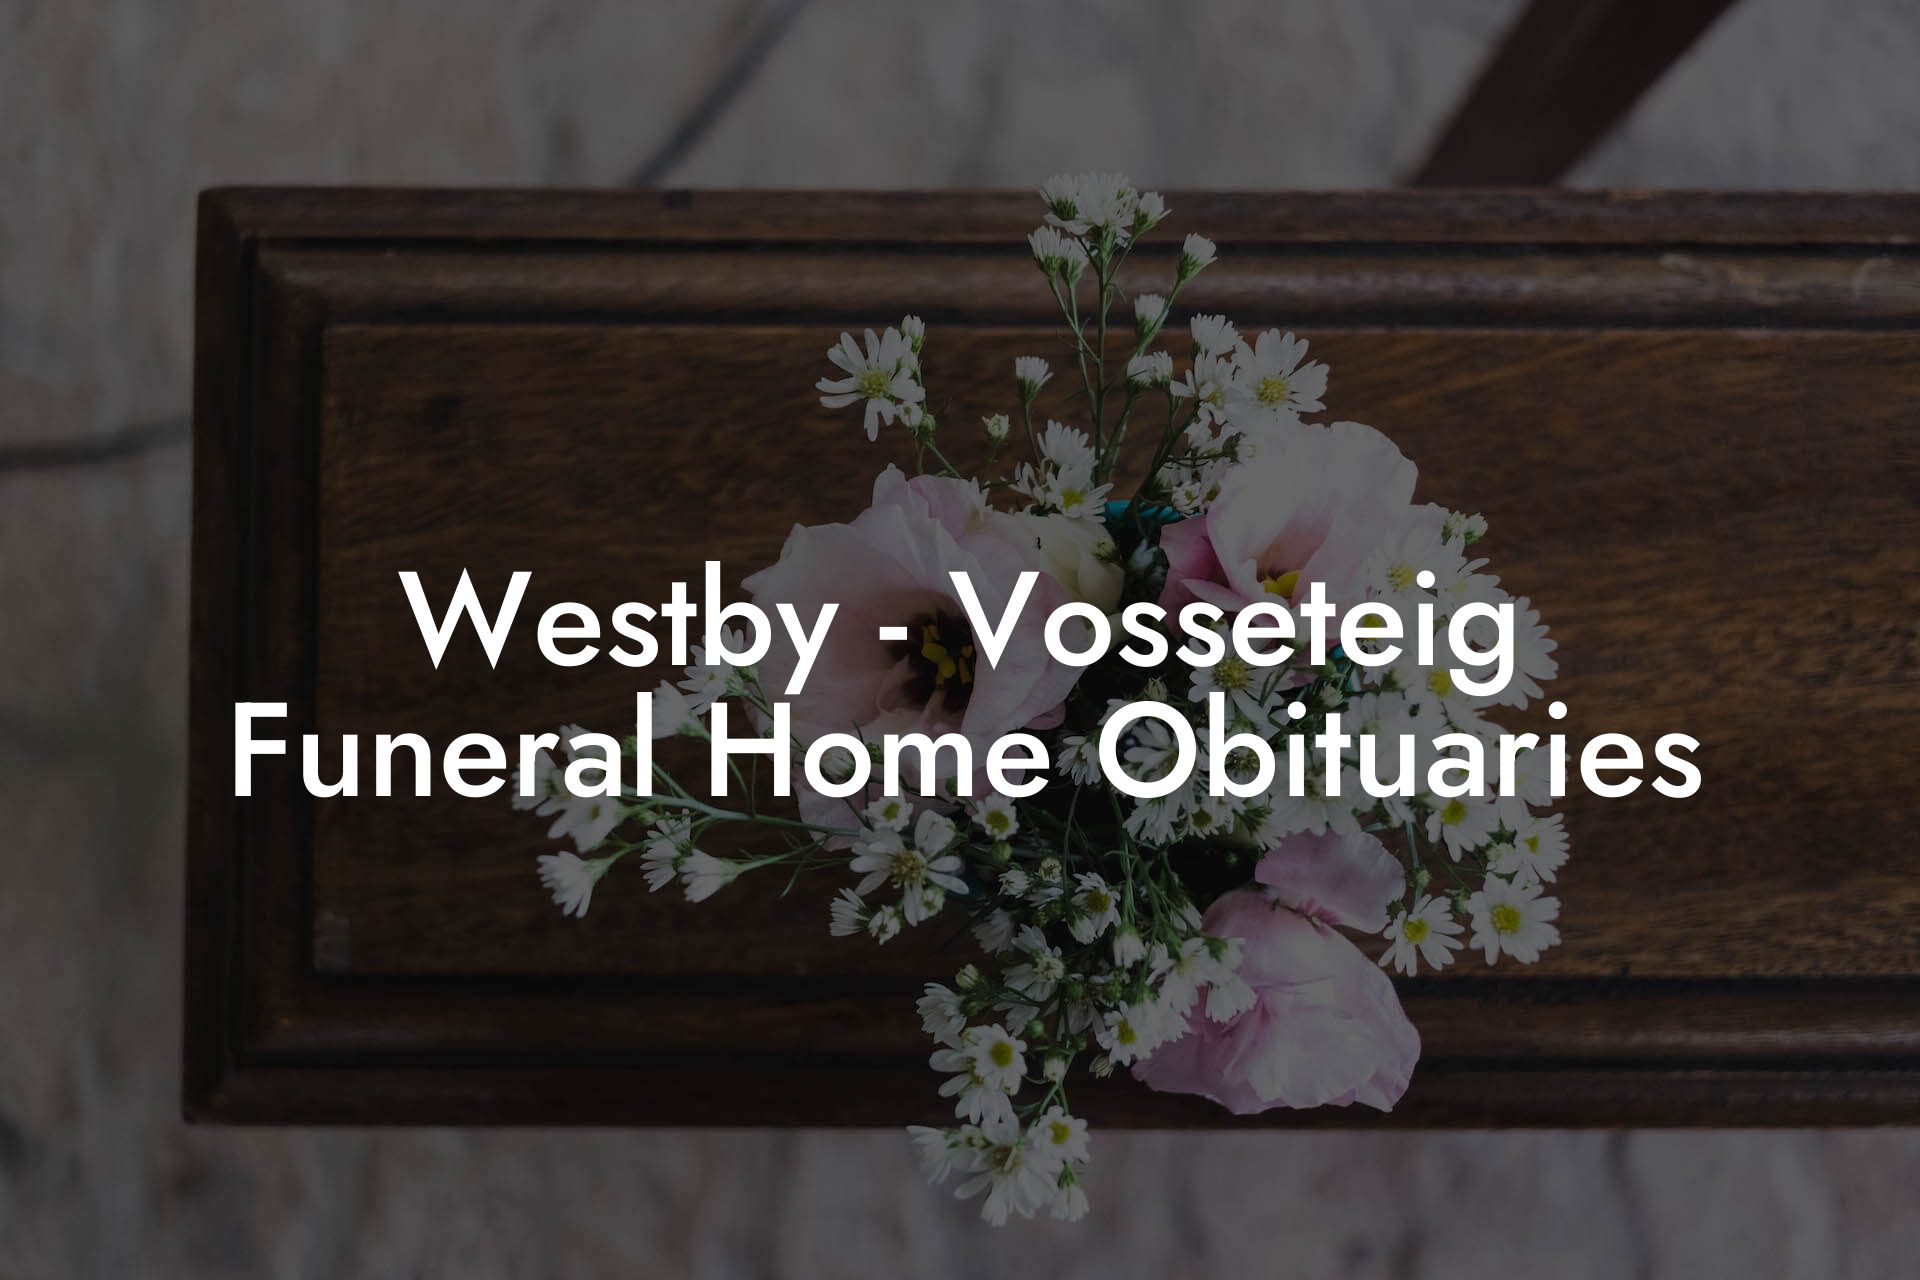 Westby - Vosseteig Funeral Home Obituaries